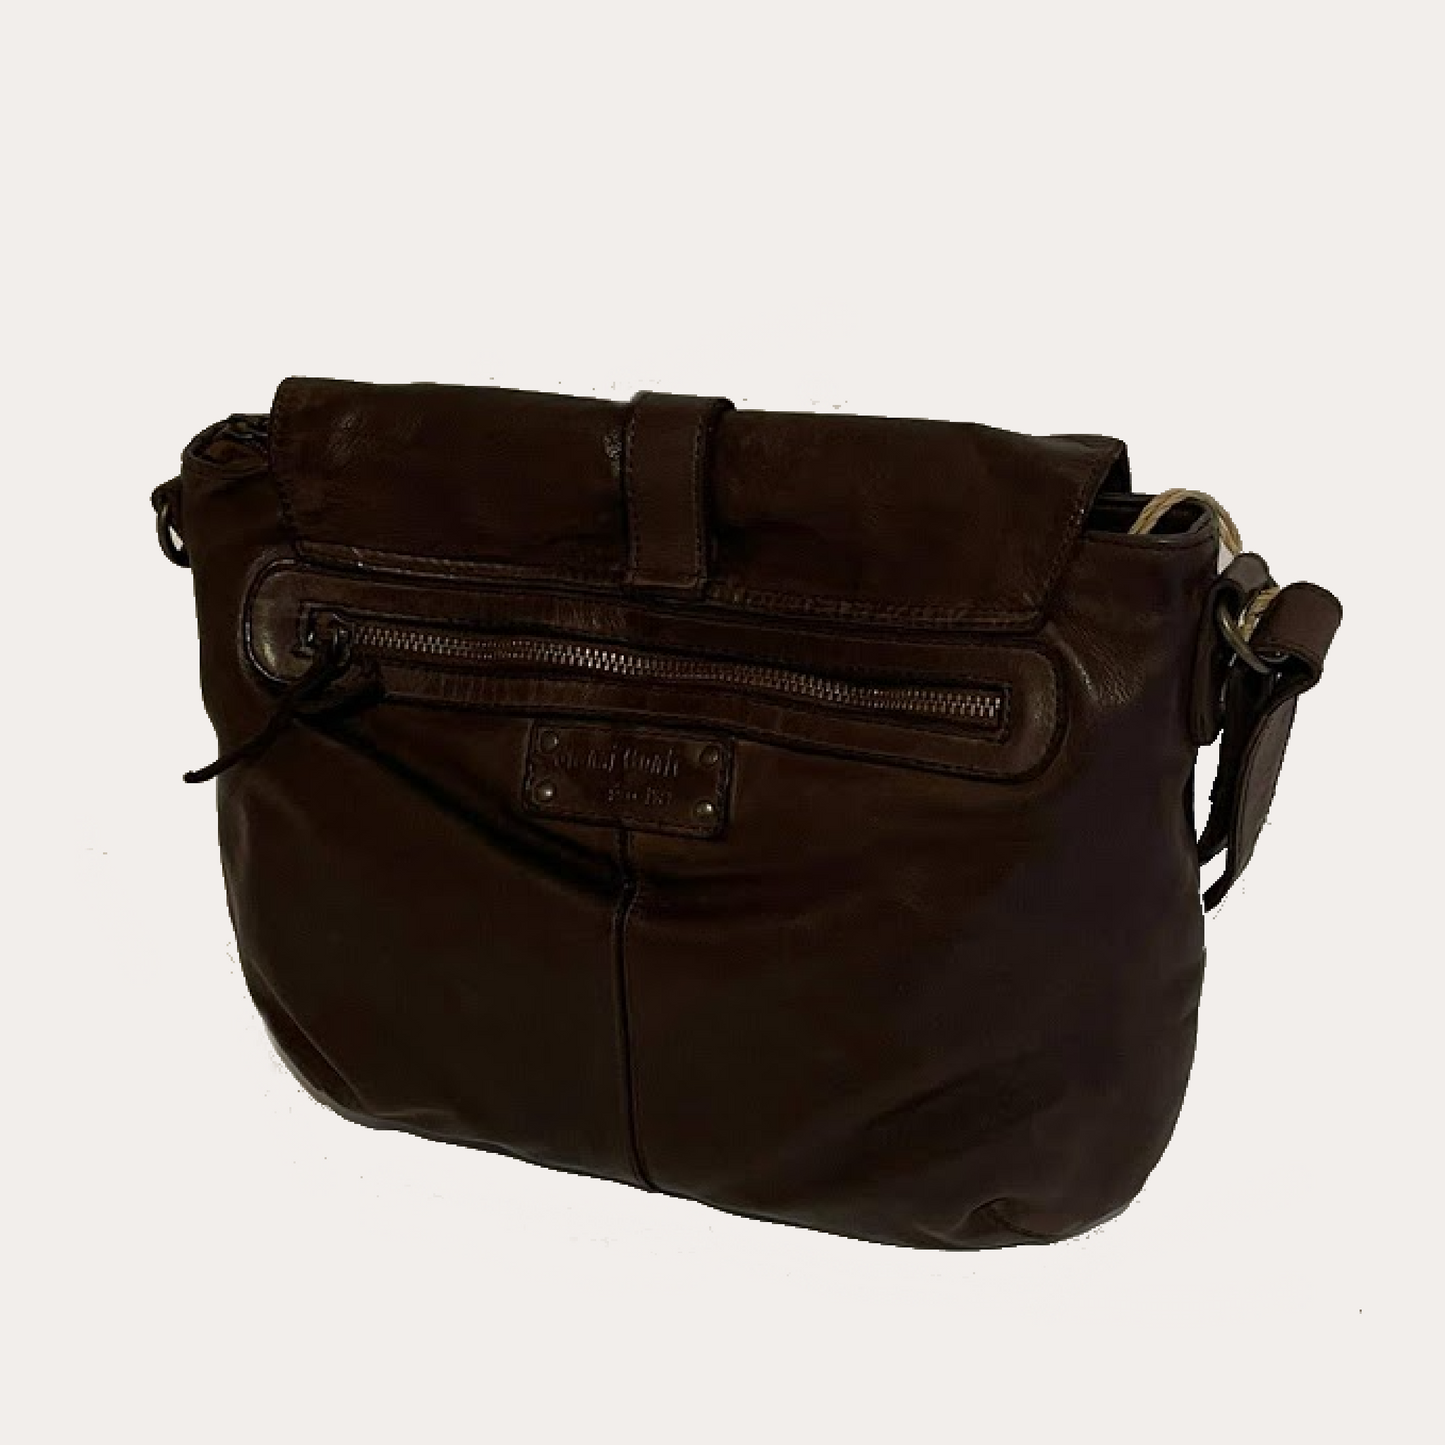 Gianni Conti Brown Vintage Leather Bag